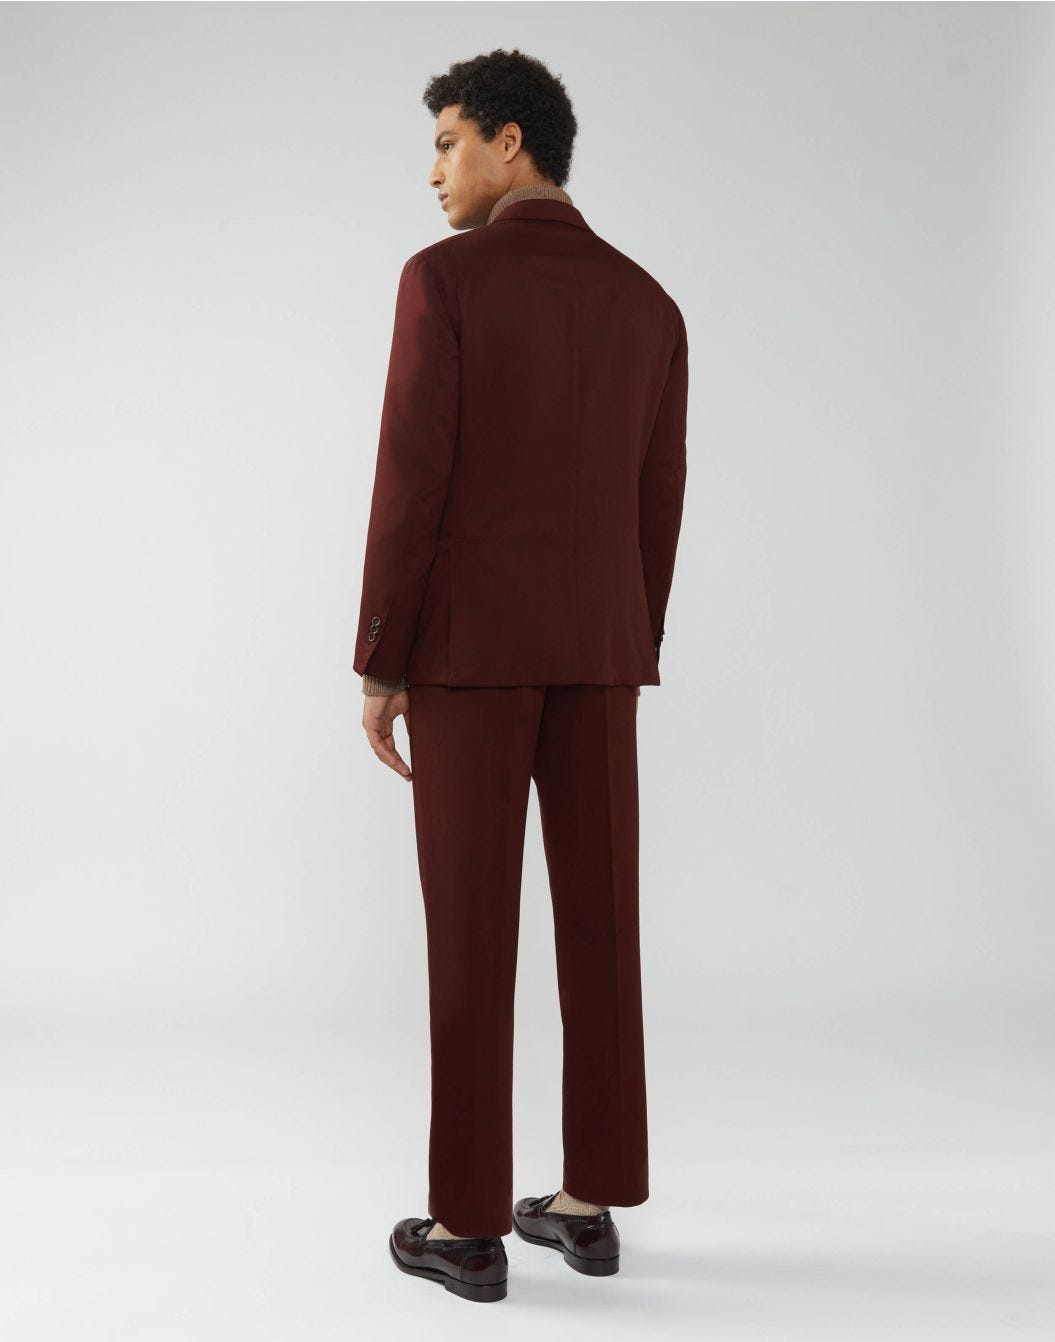 Suit in a crease-proof burgundy fabric - Supersoft 